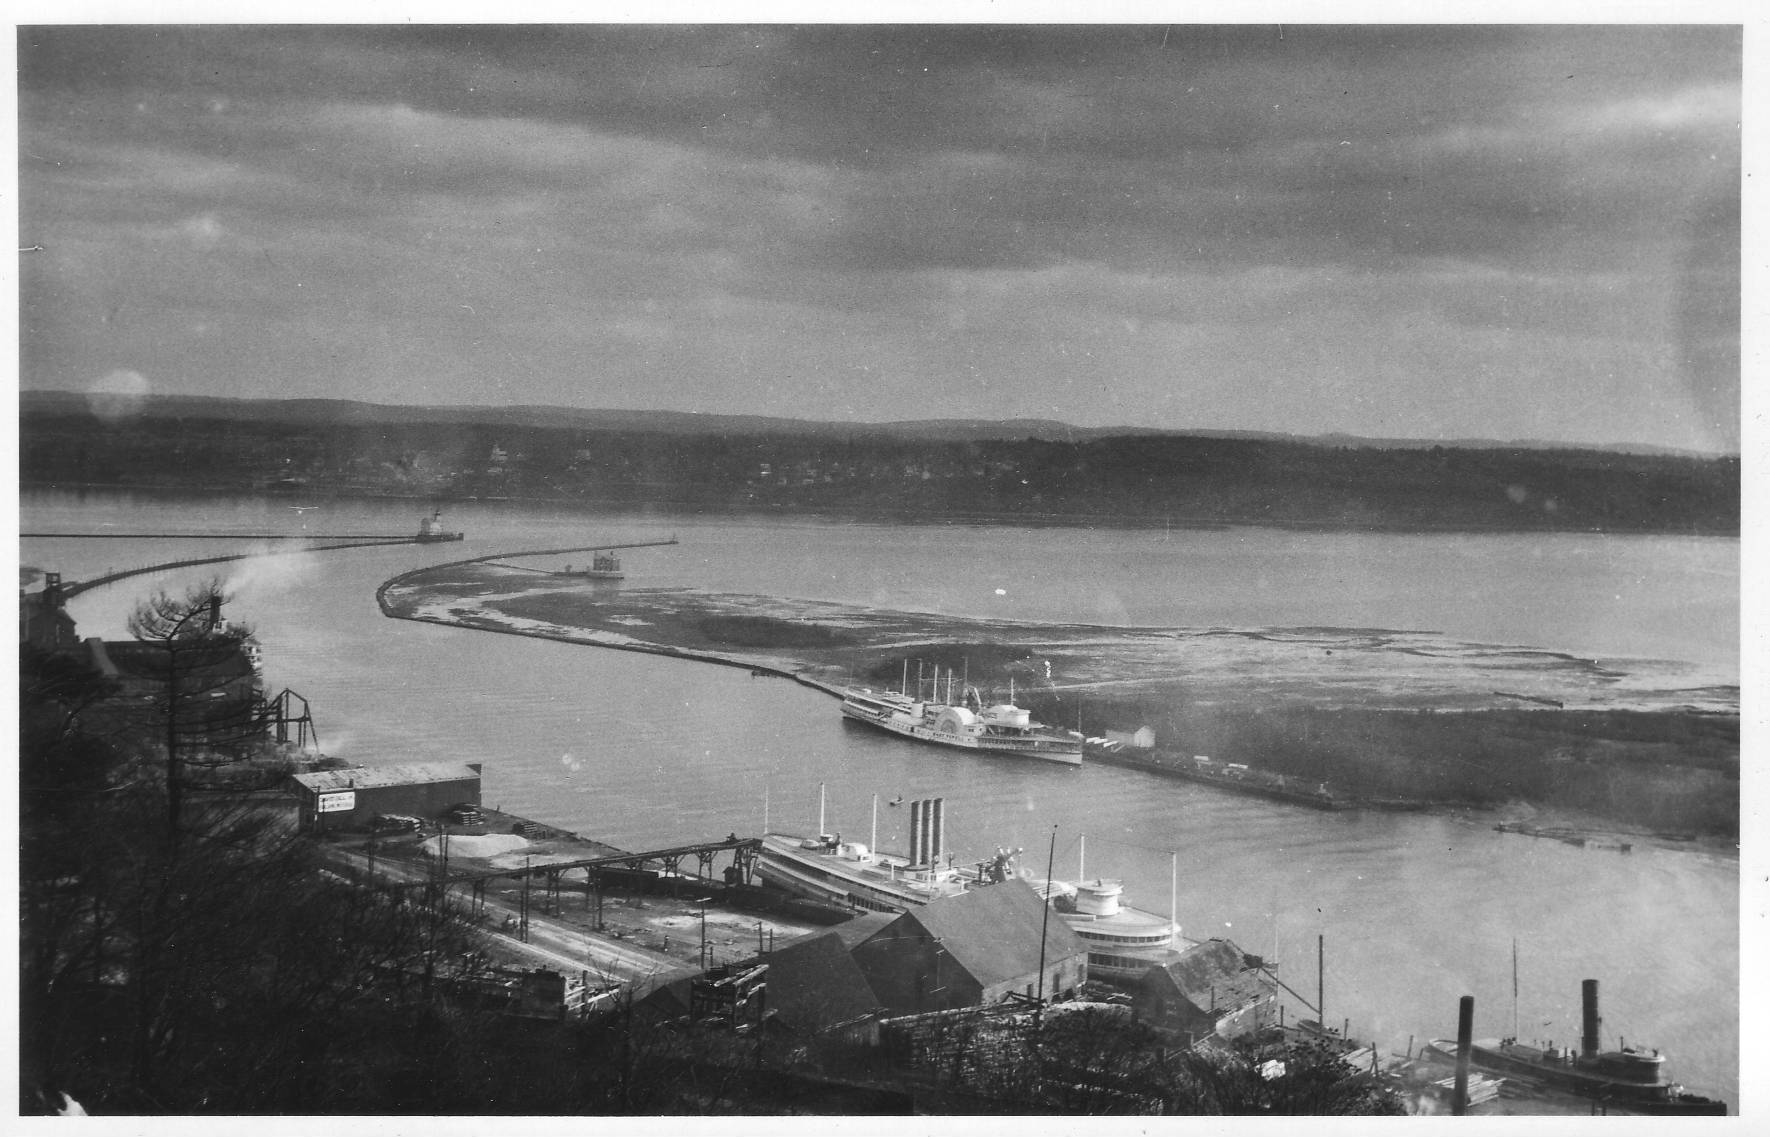 View from above looking down at the mouth of the Rondout Creek with both the old and the new Rondout lighthouses, circa 1917. The steamer “Mary Powell” is at her winter location, Sunflower Dock, in Sleightsburg across Rondout Creek, while the Hudson River Day Line steamer “Albany” at her winter berth in the foreground. While the creek looks very different today, it is a beautiful part of our estuary. Donald C. Ringwald Collection, HRMM